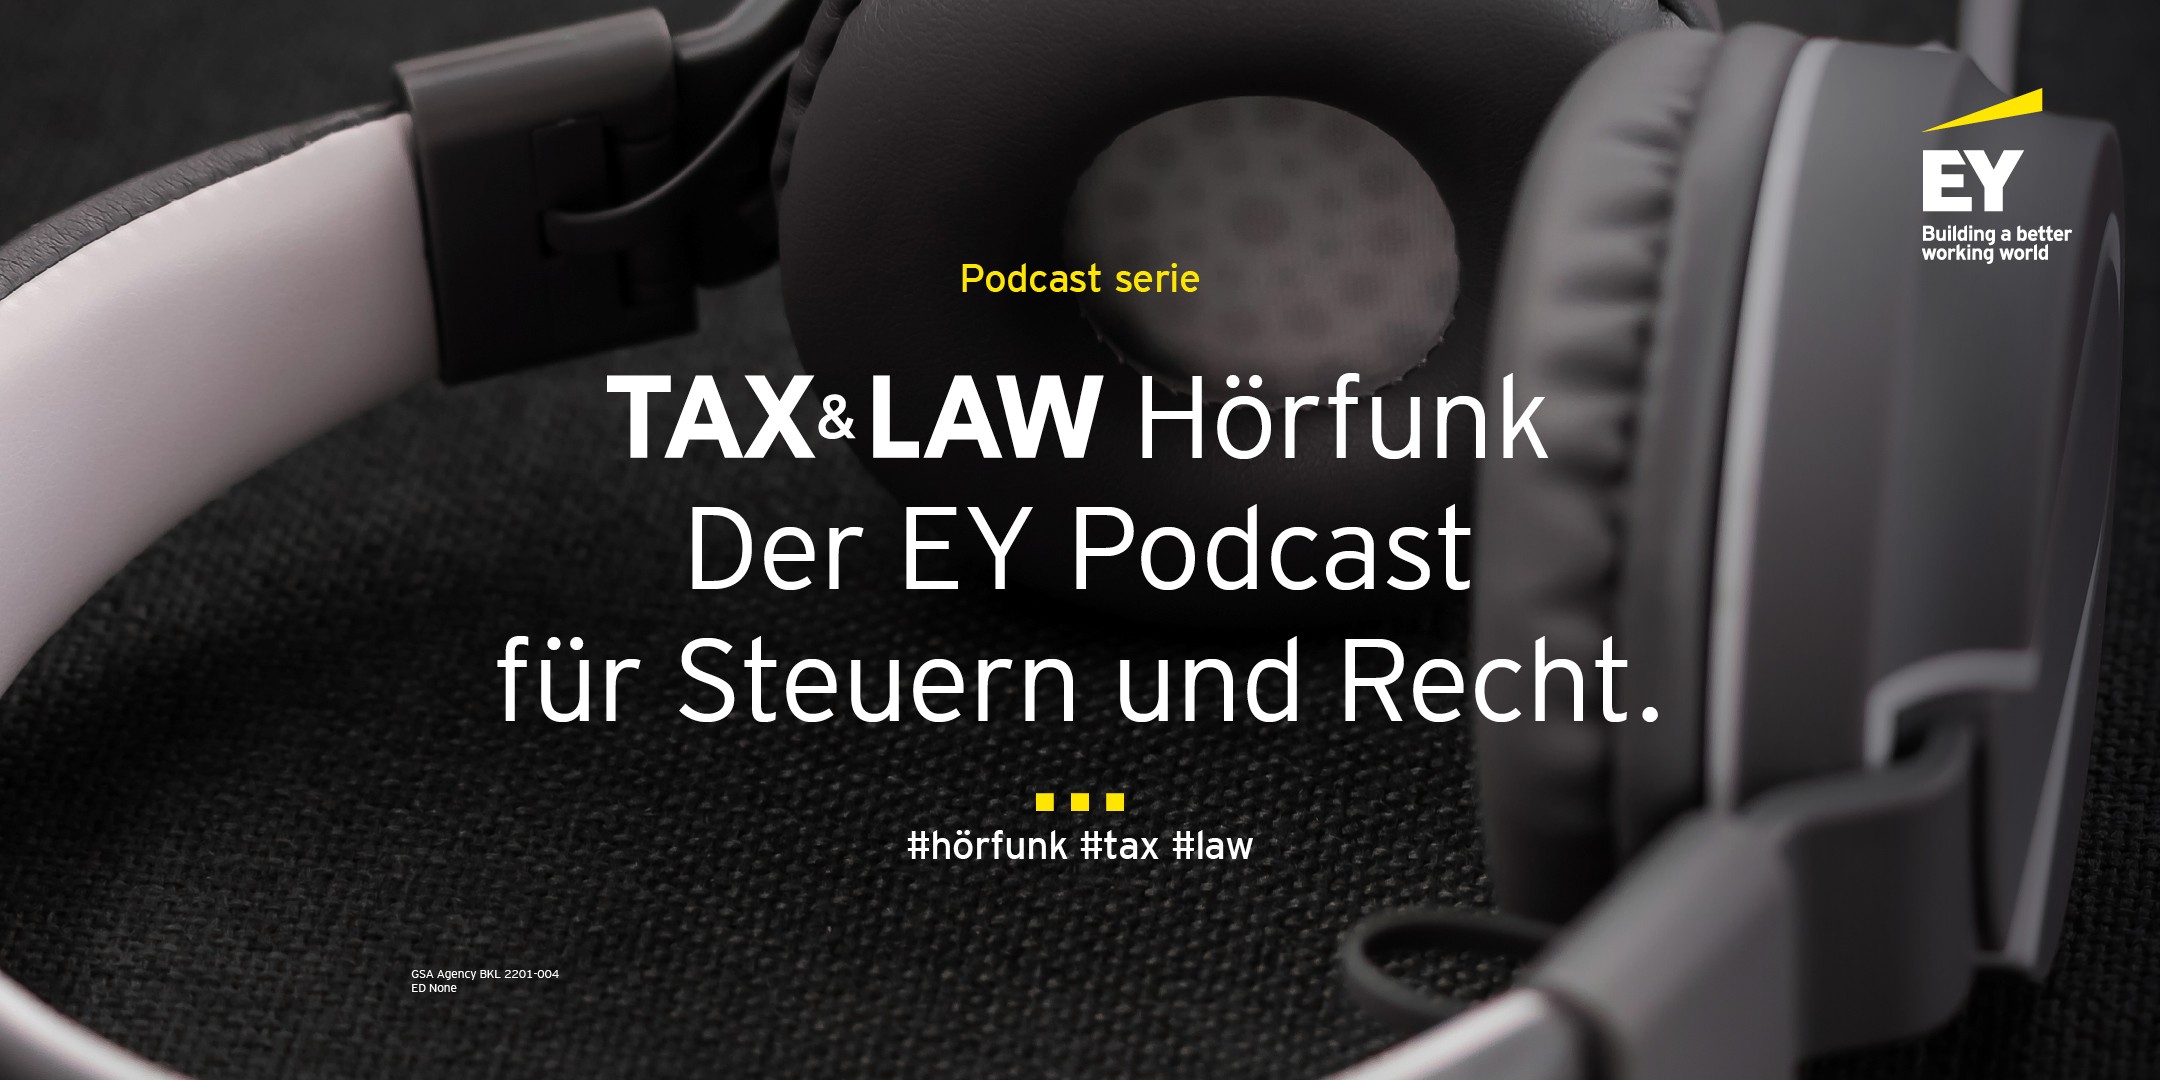 ey-banner-tax-and-law-hoerfunk-version2-20220128